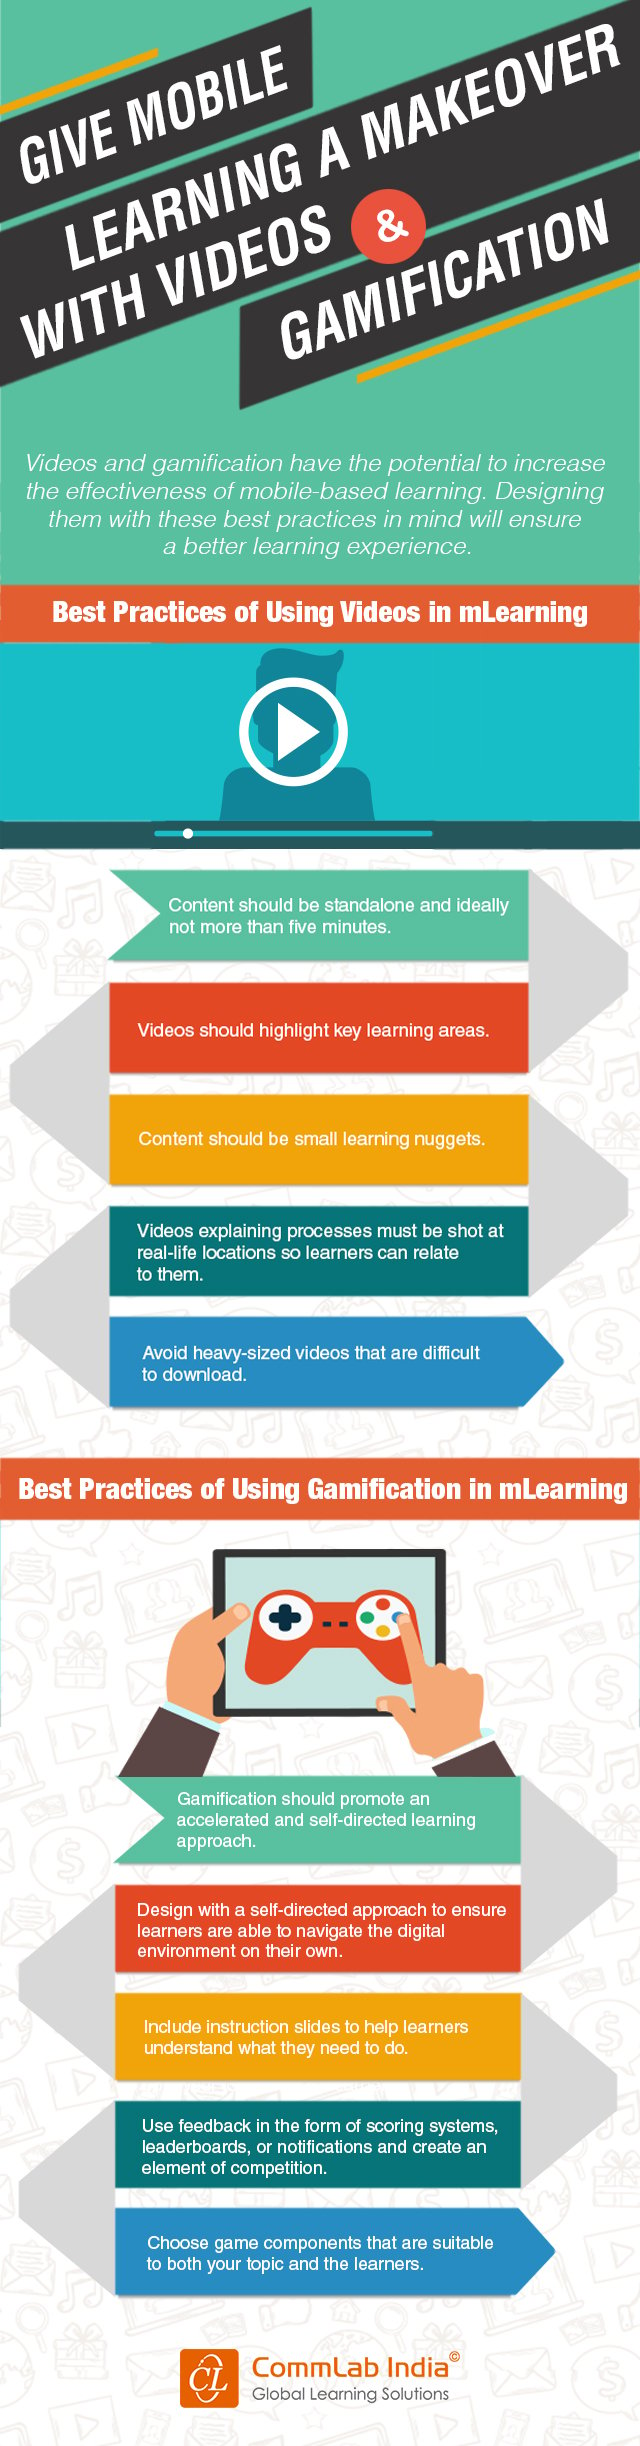 Give Mobile Learning A Makeover With Videos & Gamification [Infographic]